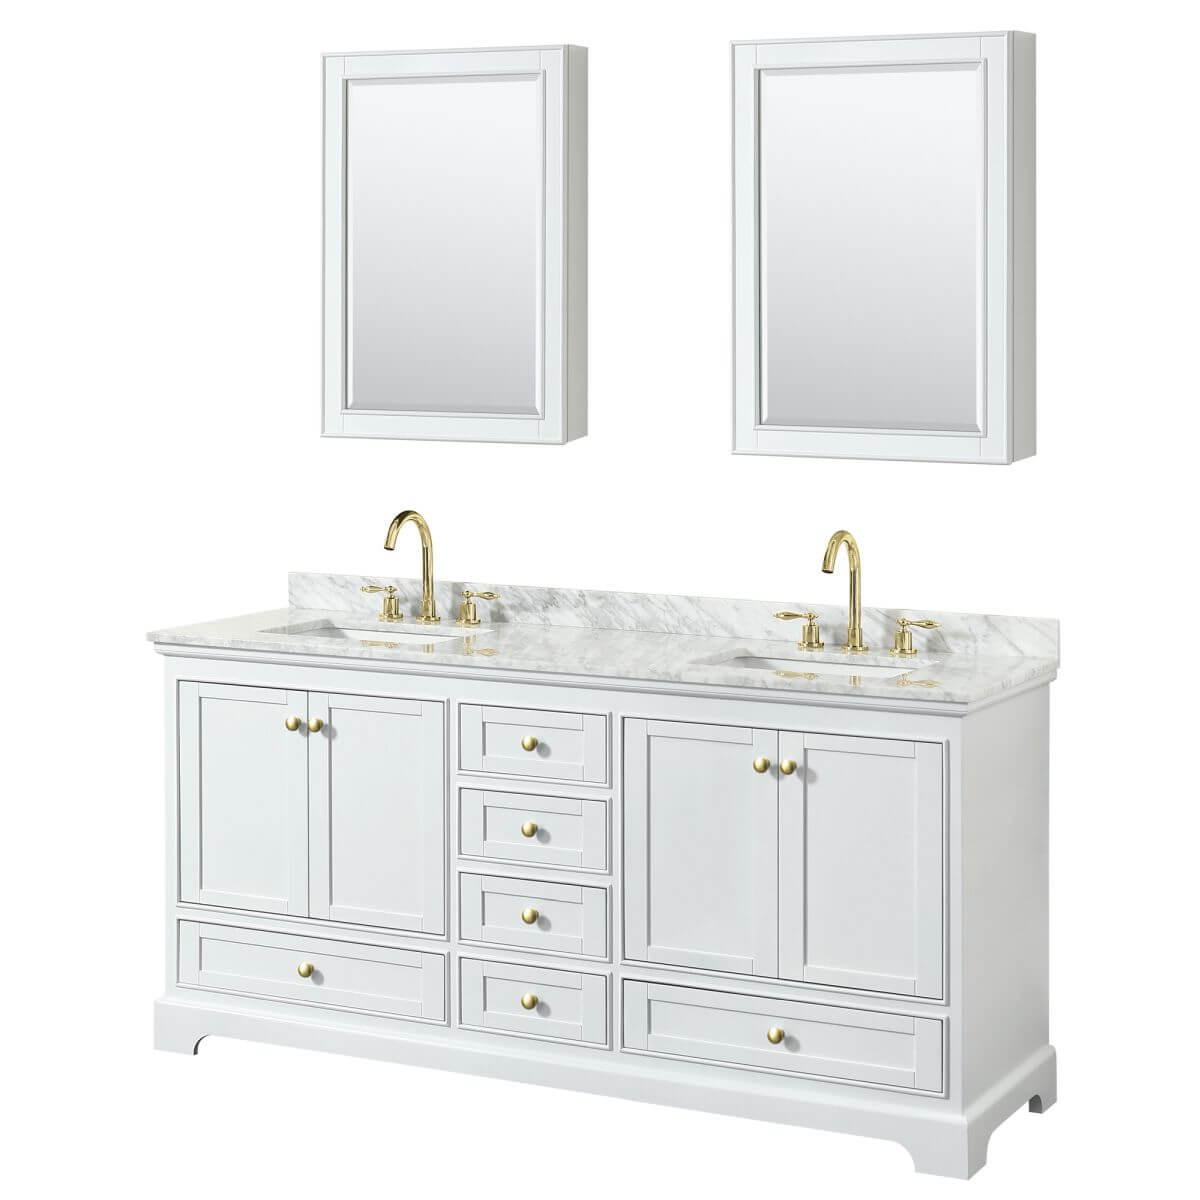 Wyndham Collection Deborah 72 inch Double Bathroom Vanity in White with White Carrara Marble Countertop, Undermount Square Sinks, Brushed Gold Trim and Medicine Cabinets - WCS202072DWGCMUNSMED